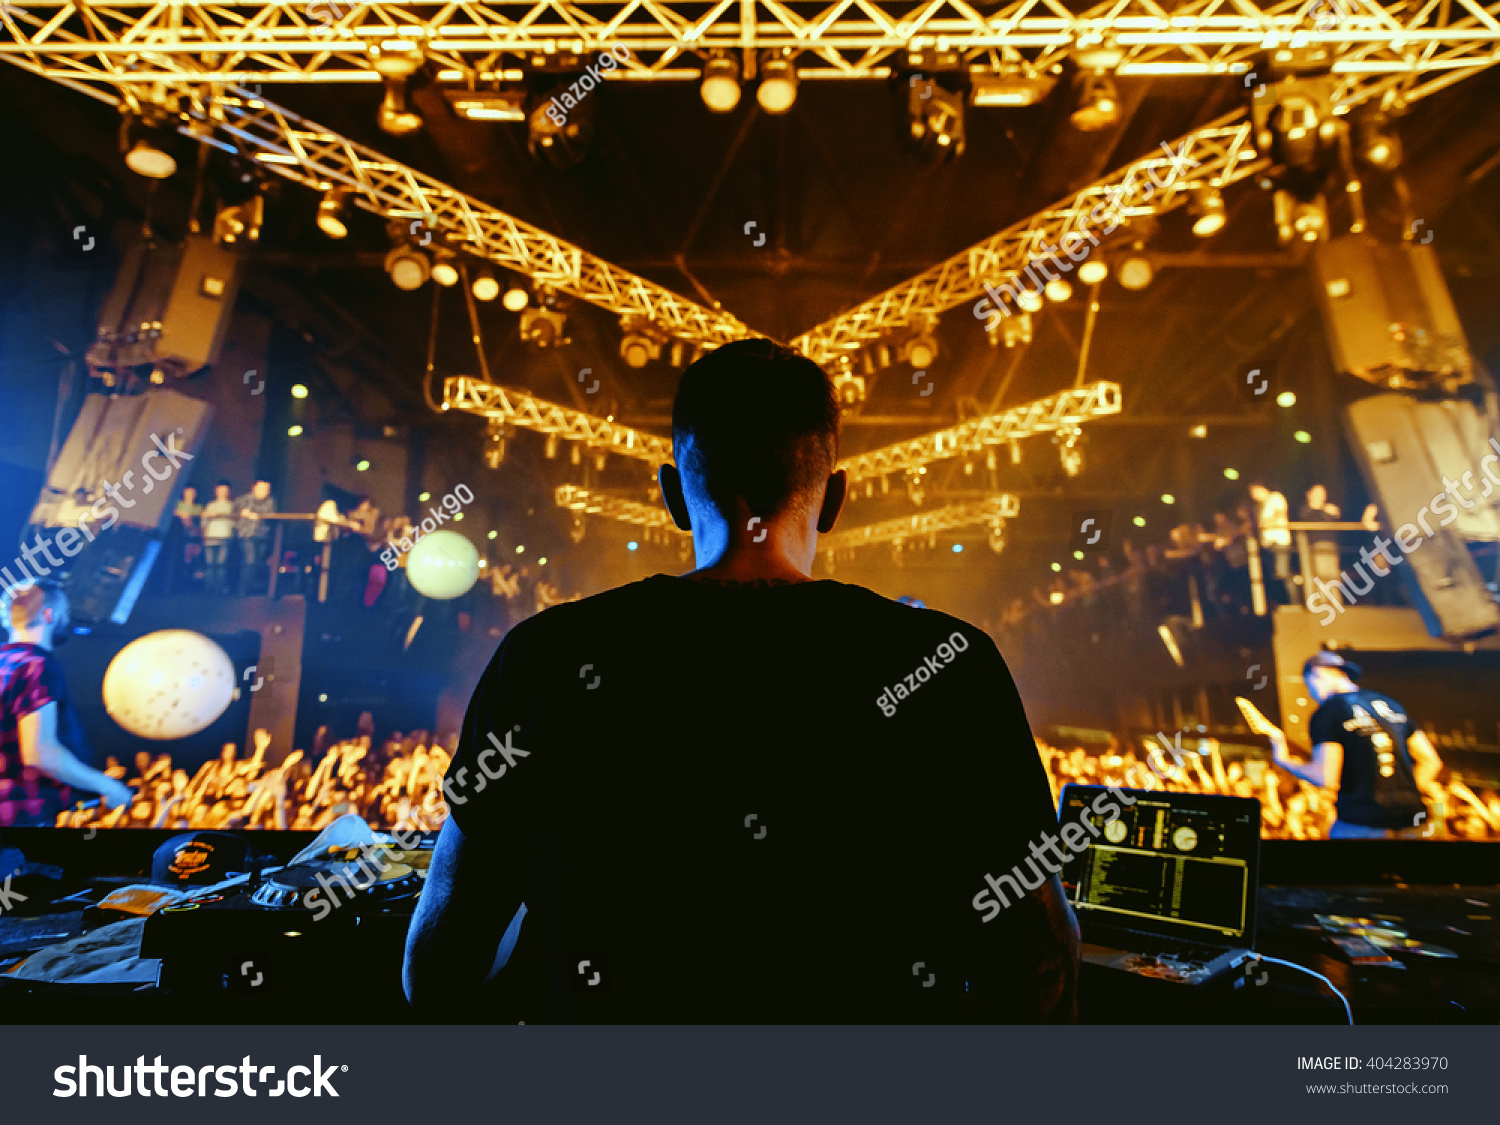 DJ hands up at night club party under yellow lasers with crowd of people #404283970